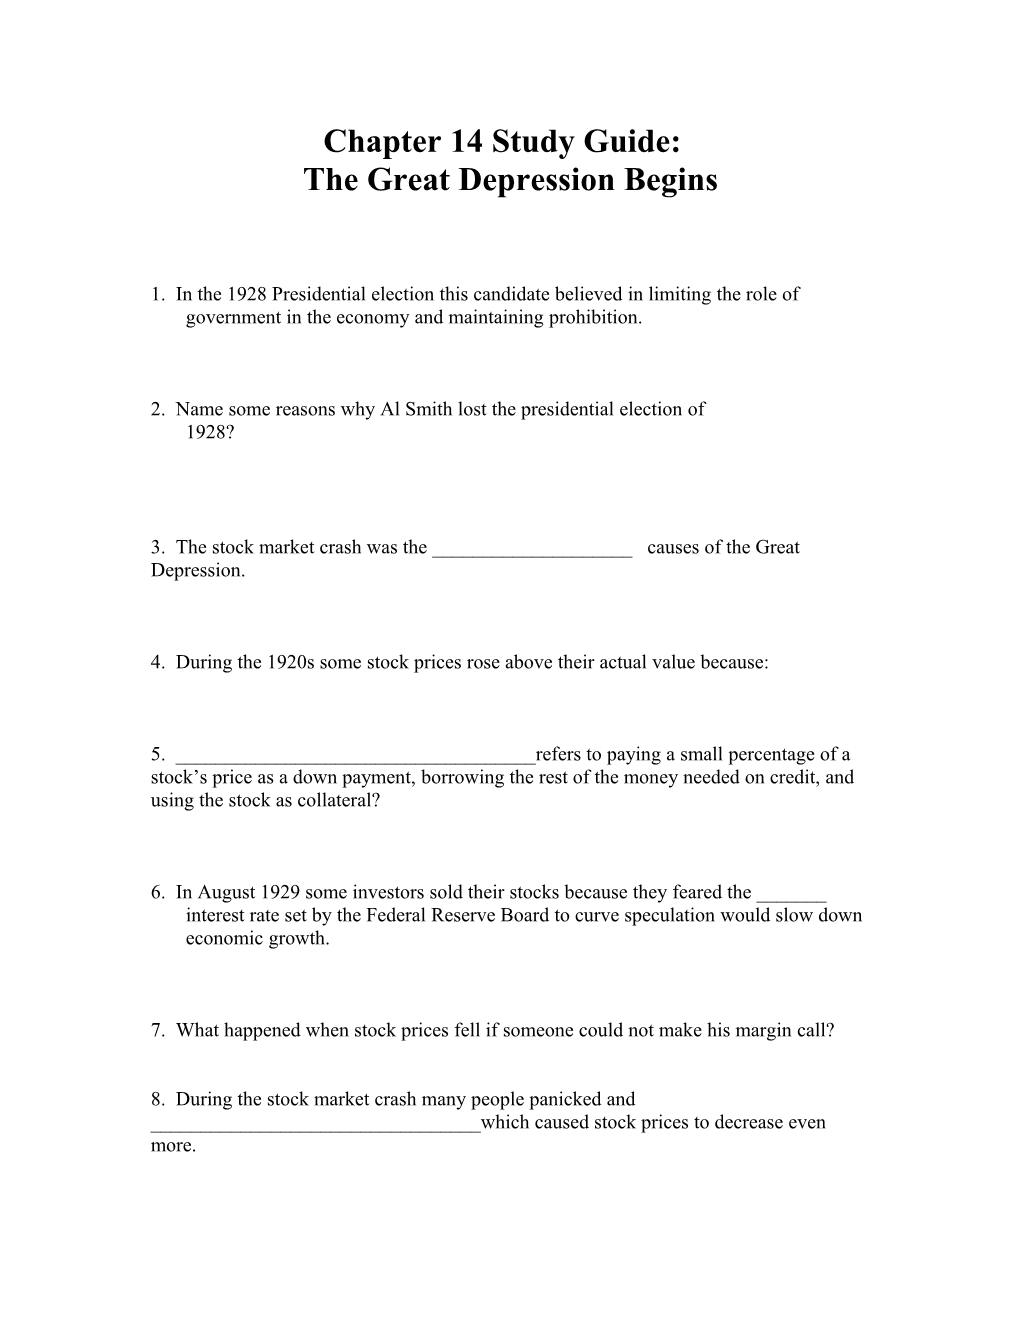 Chapter 14 Test: the Great Depression Begins 1929-1933